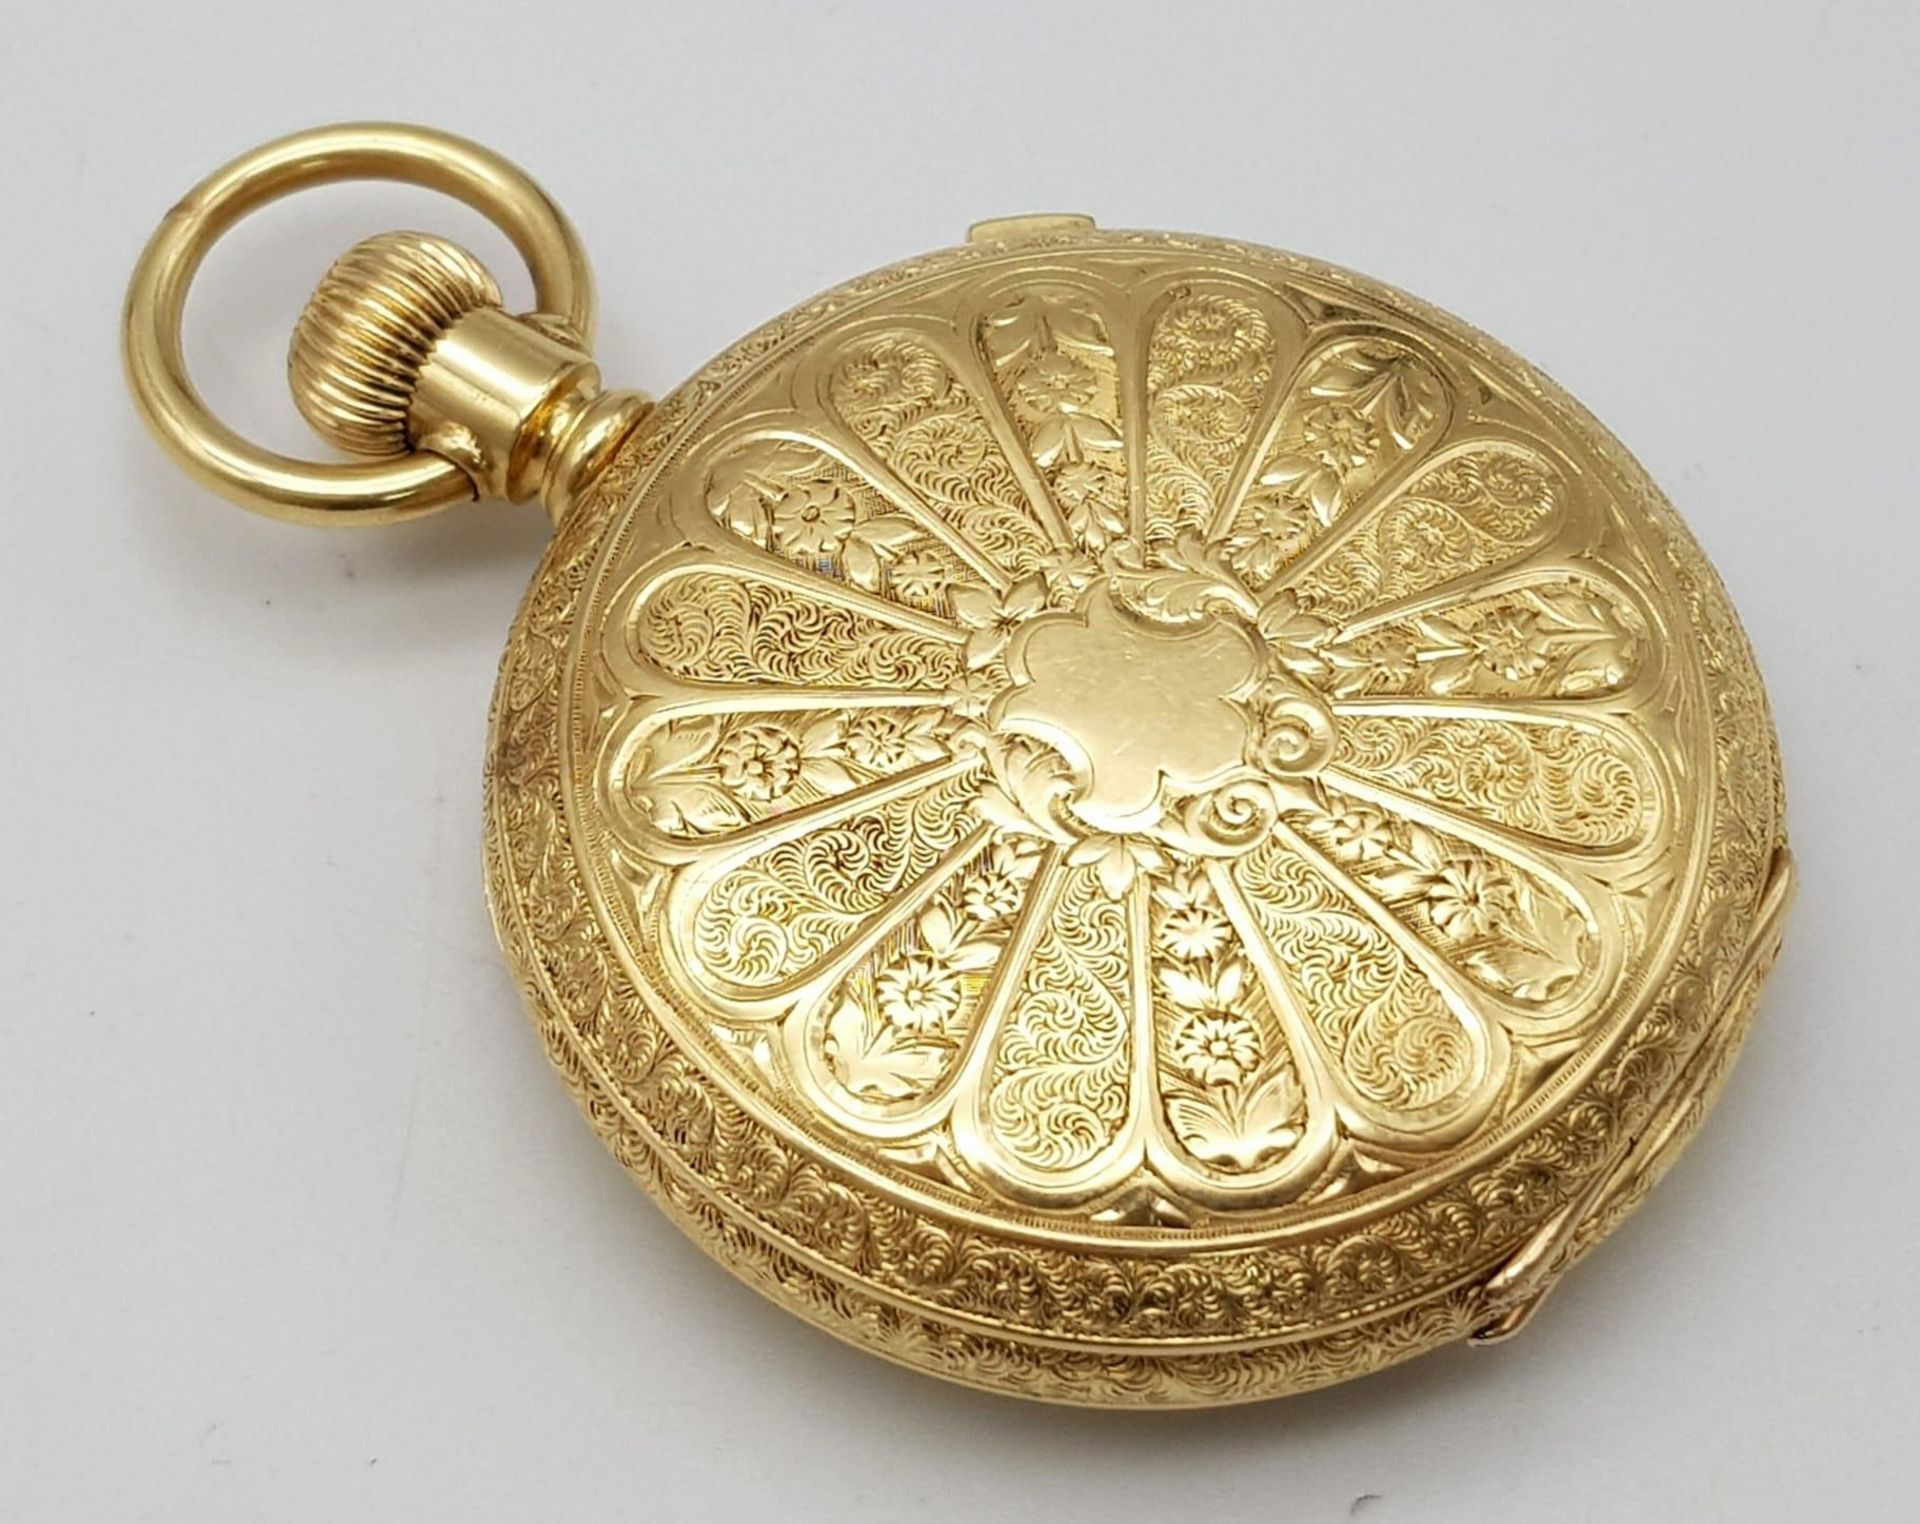 An Antique Waltham 18K Gold Full Hunter Pocket Watch. The case is ornately decorated in a floral - Bild 4 aus 13